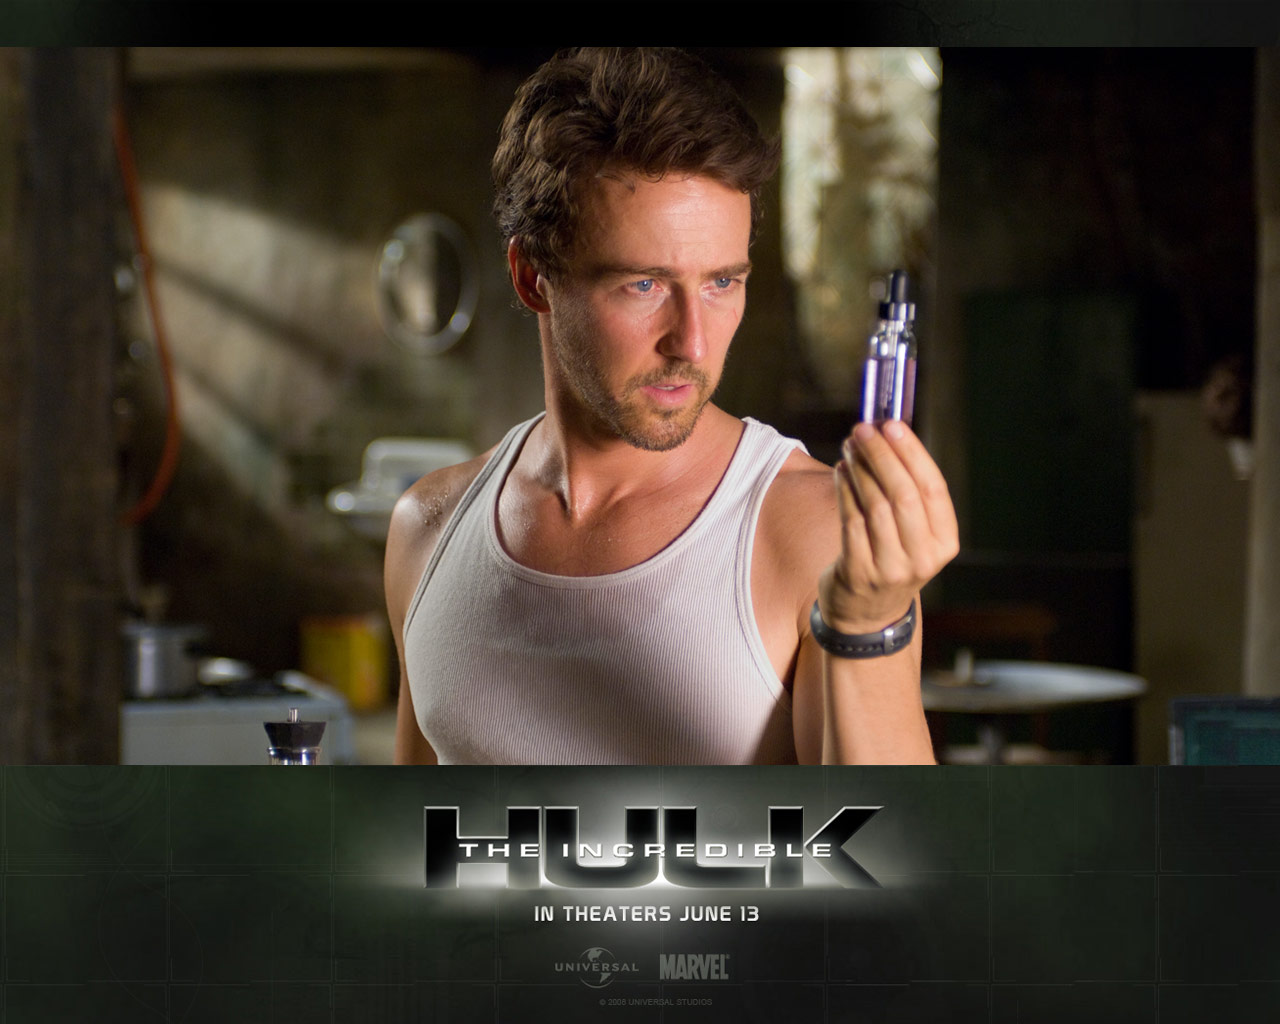 Download full size The Incredible Hulk wallpaper / Movies / 1280x1024